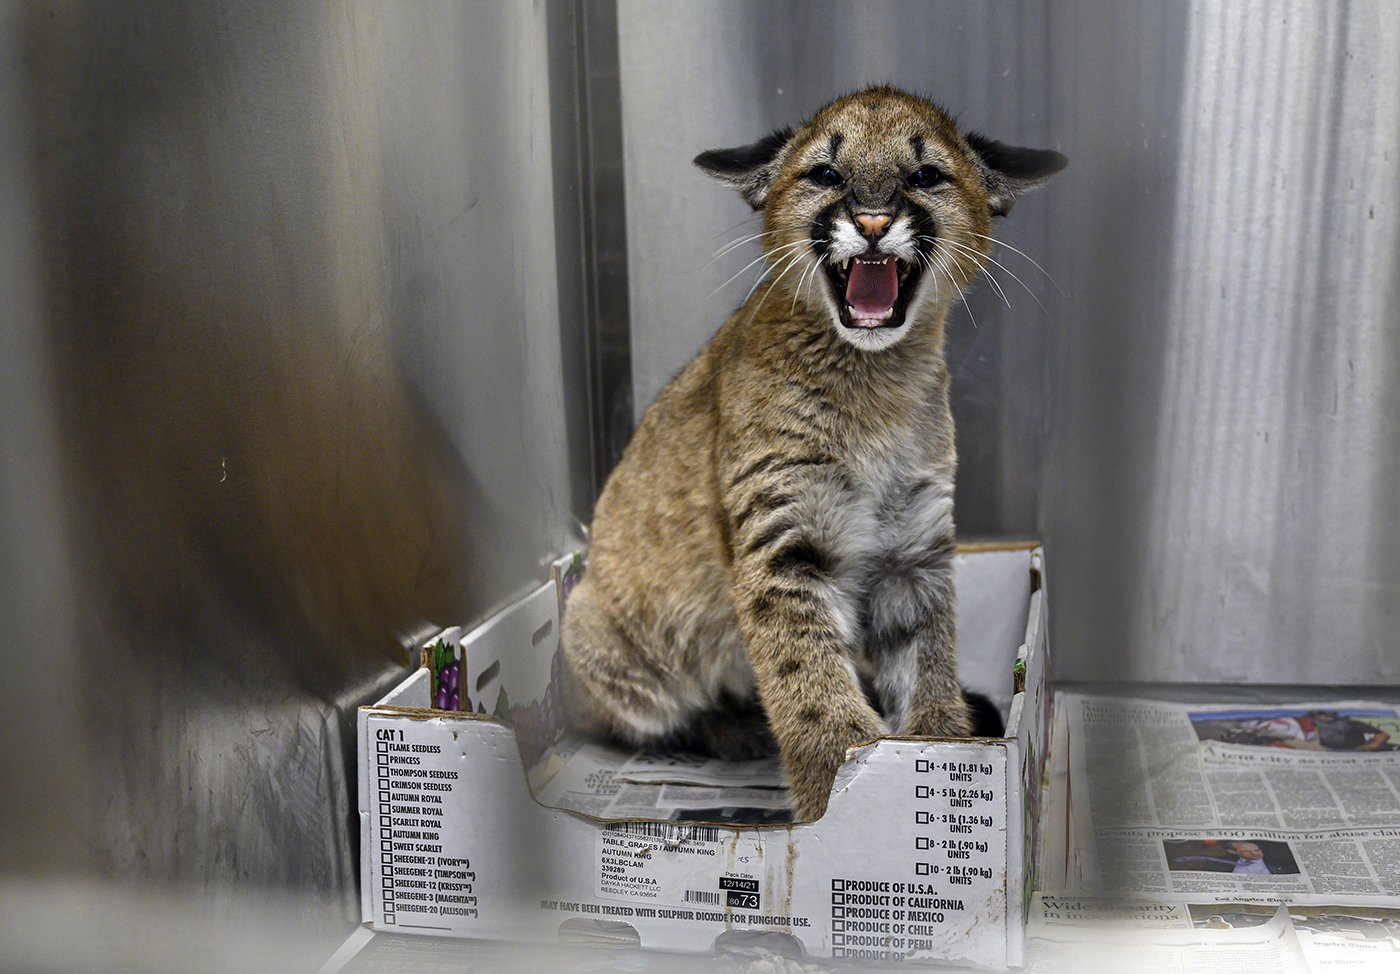  A baby cougar lets out a hiss while recuperating at Serrano Animal and Bird Hospital in Lake Forest on Wednesday, December 29, 2021. The cub was only 12 weeks when he was hit by car in Monterey. Because he will never learn to hunt, he will live in a